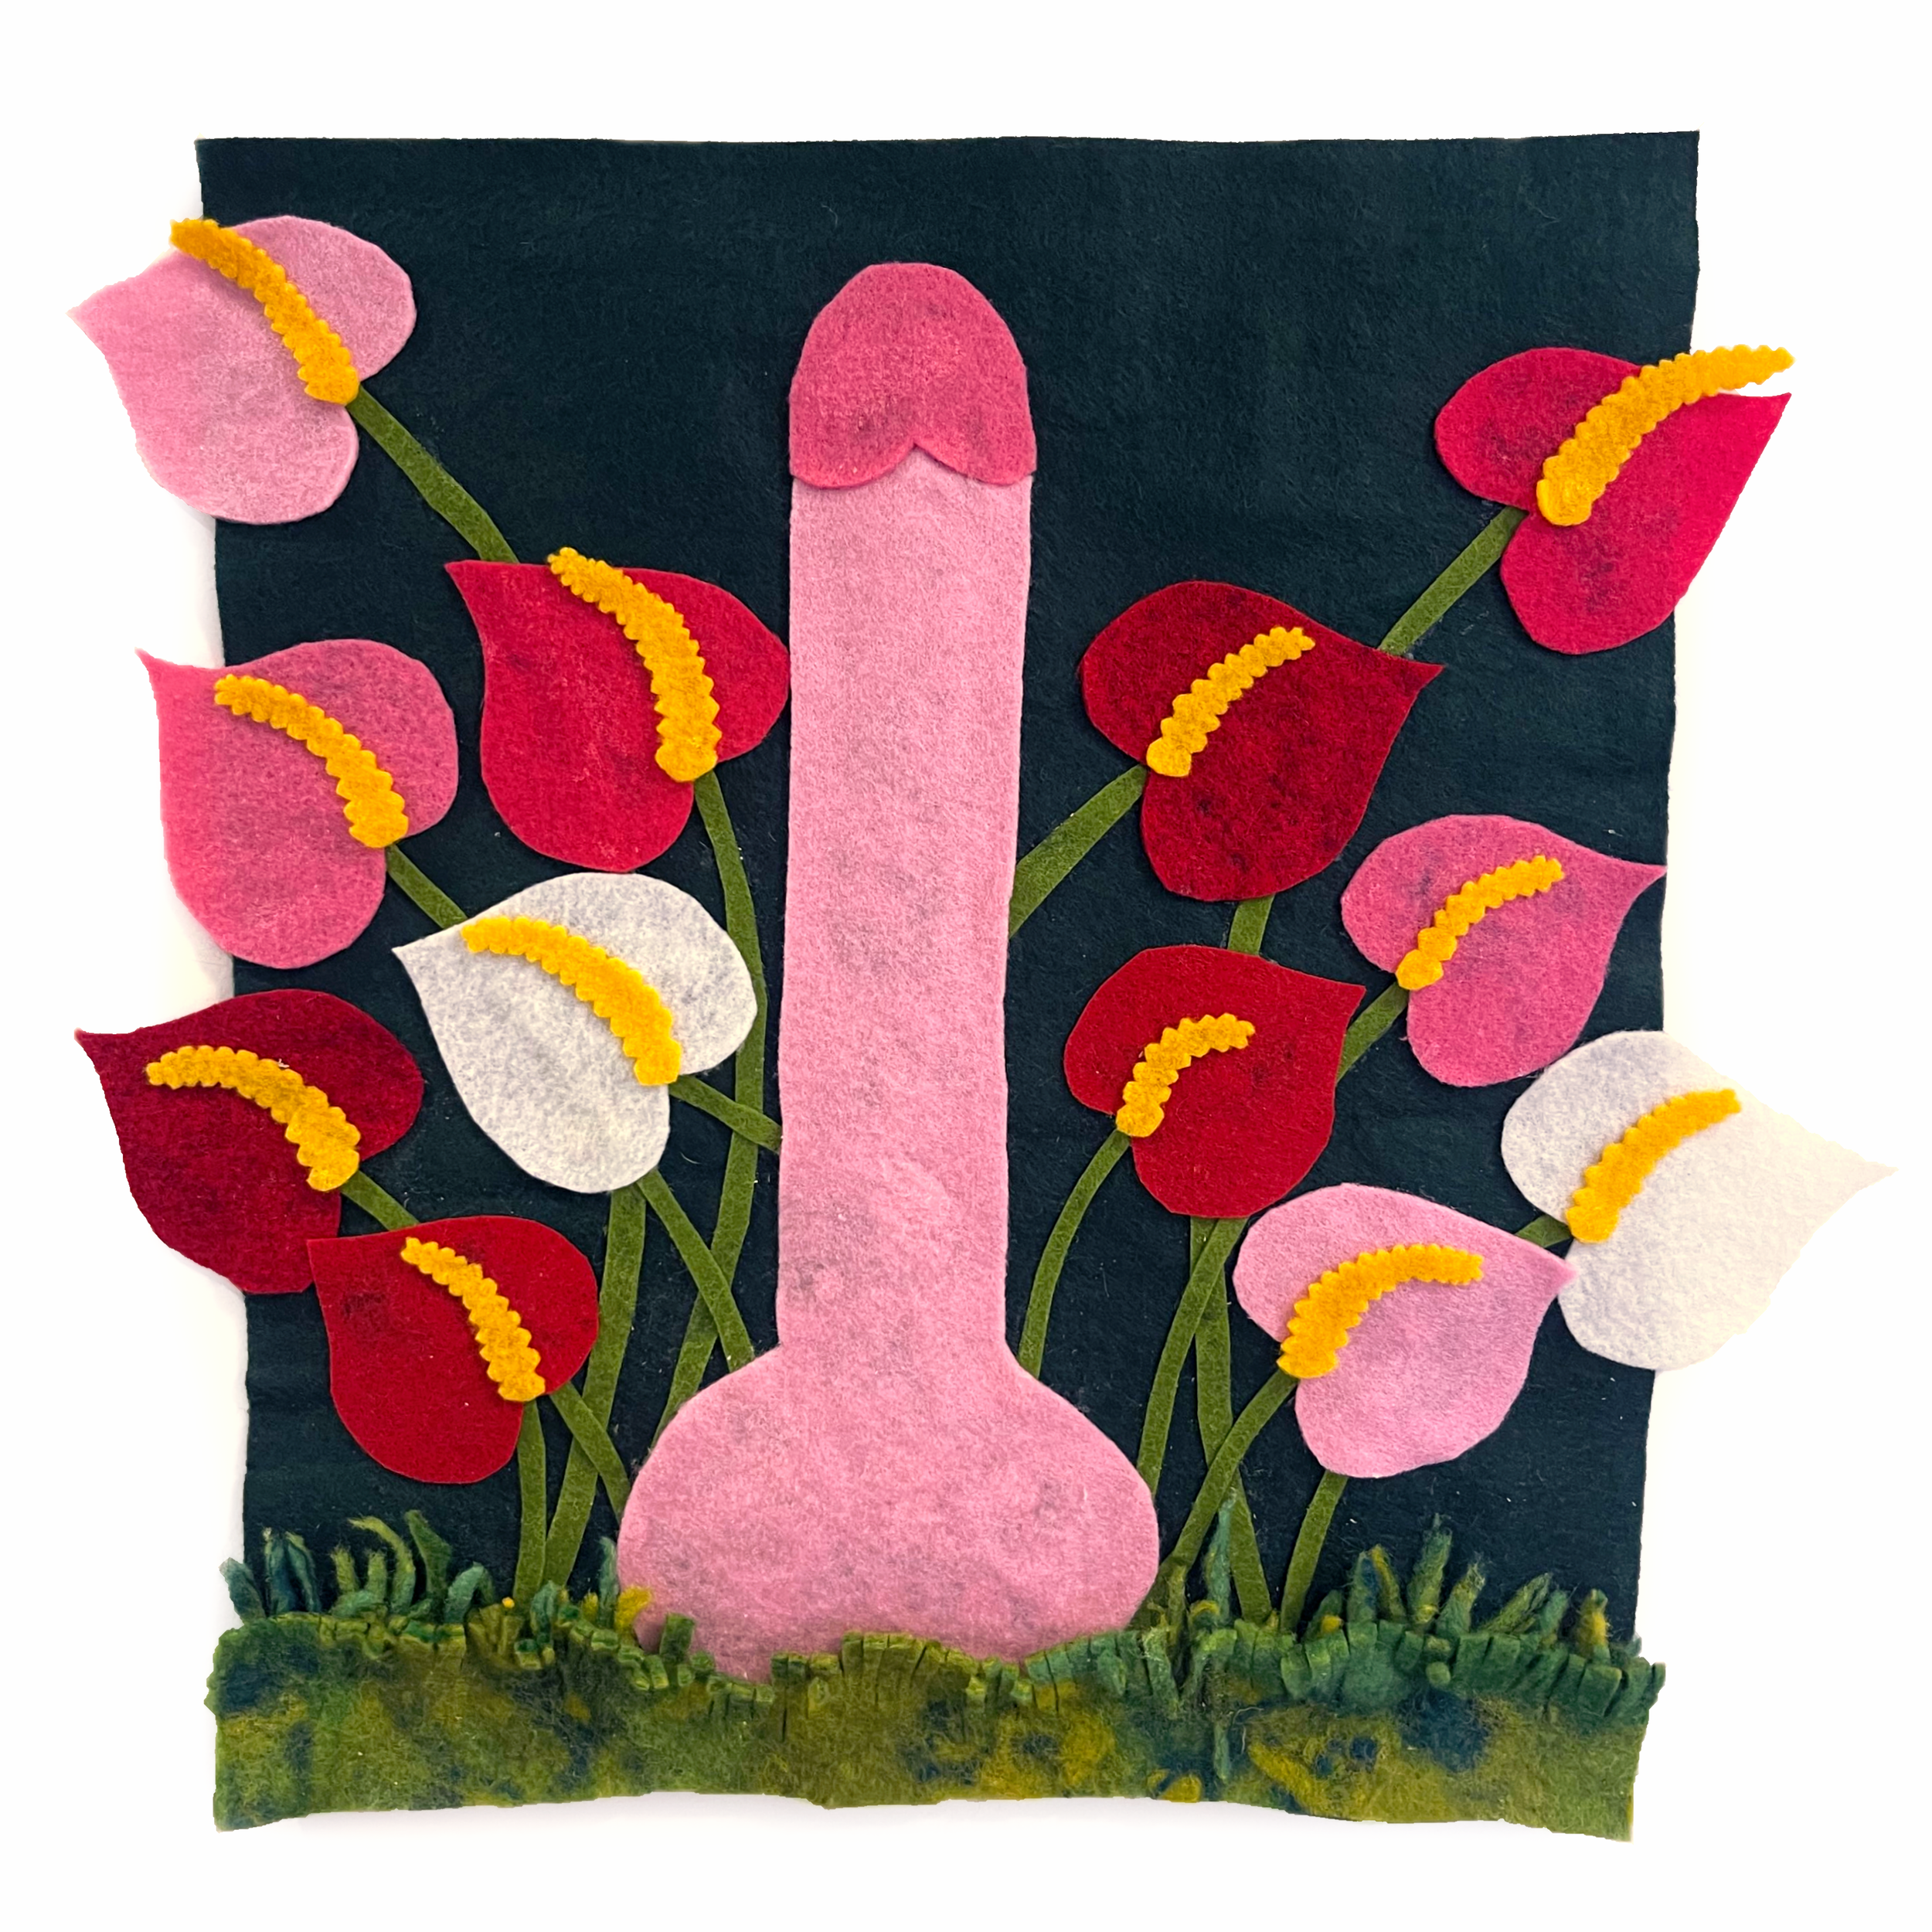 Dick and Anthuriums